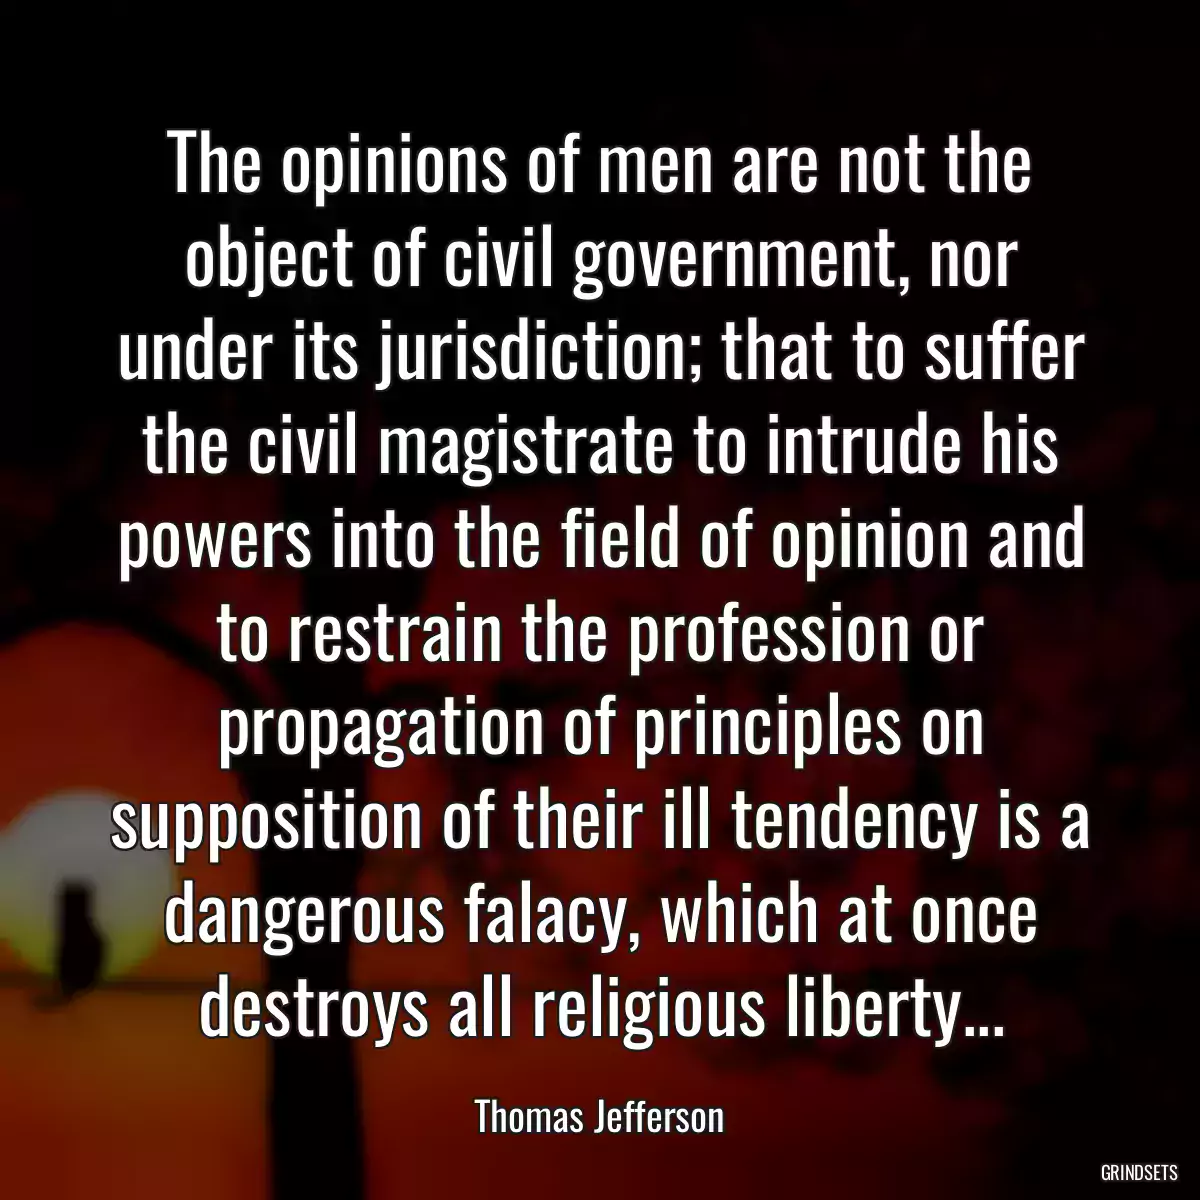 The opinions of men are not the object of civil government, nor under its jurisdiction; that to suffer the civil magistrate to intrude his powers into the field of opinion and to restrain the profession or propagation of principles on supposition of their ill tendency is a dangerous falacy, which at once destroys all religious liberty...